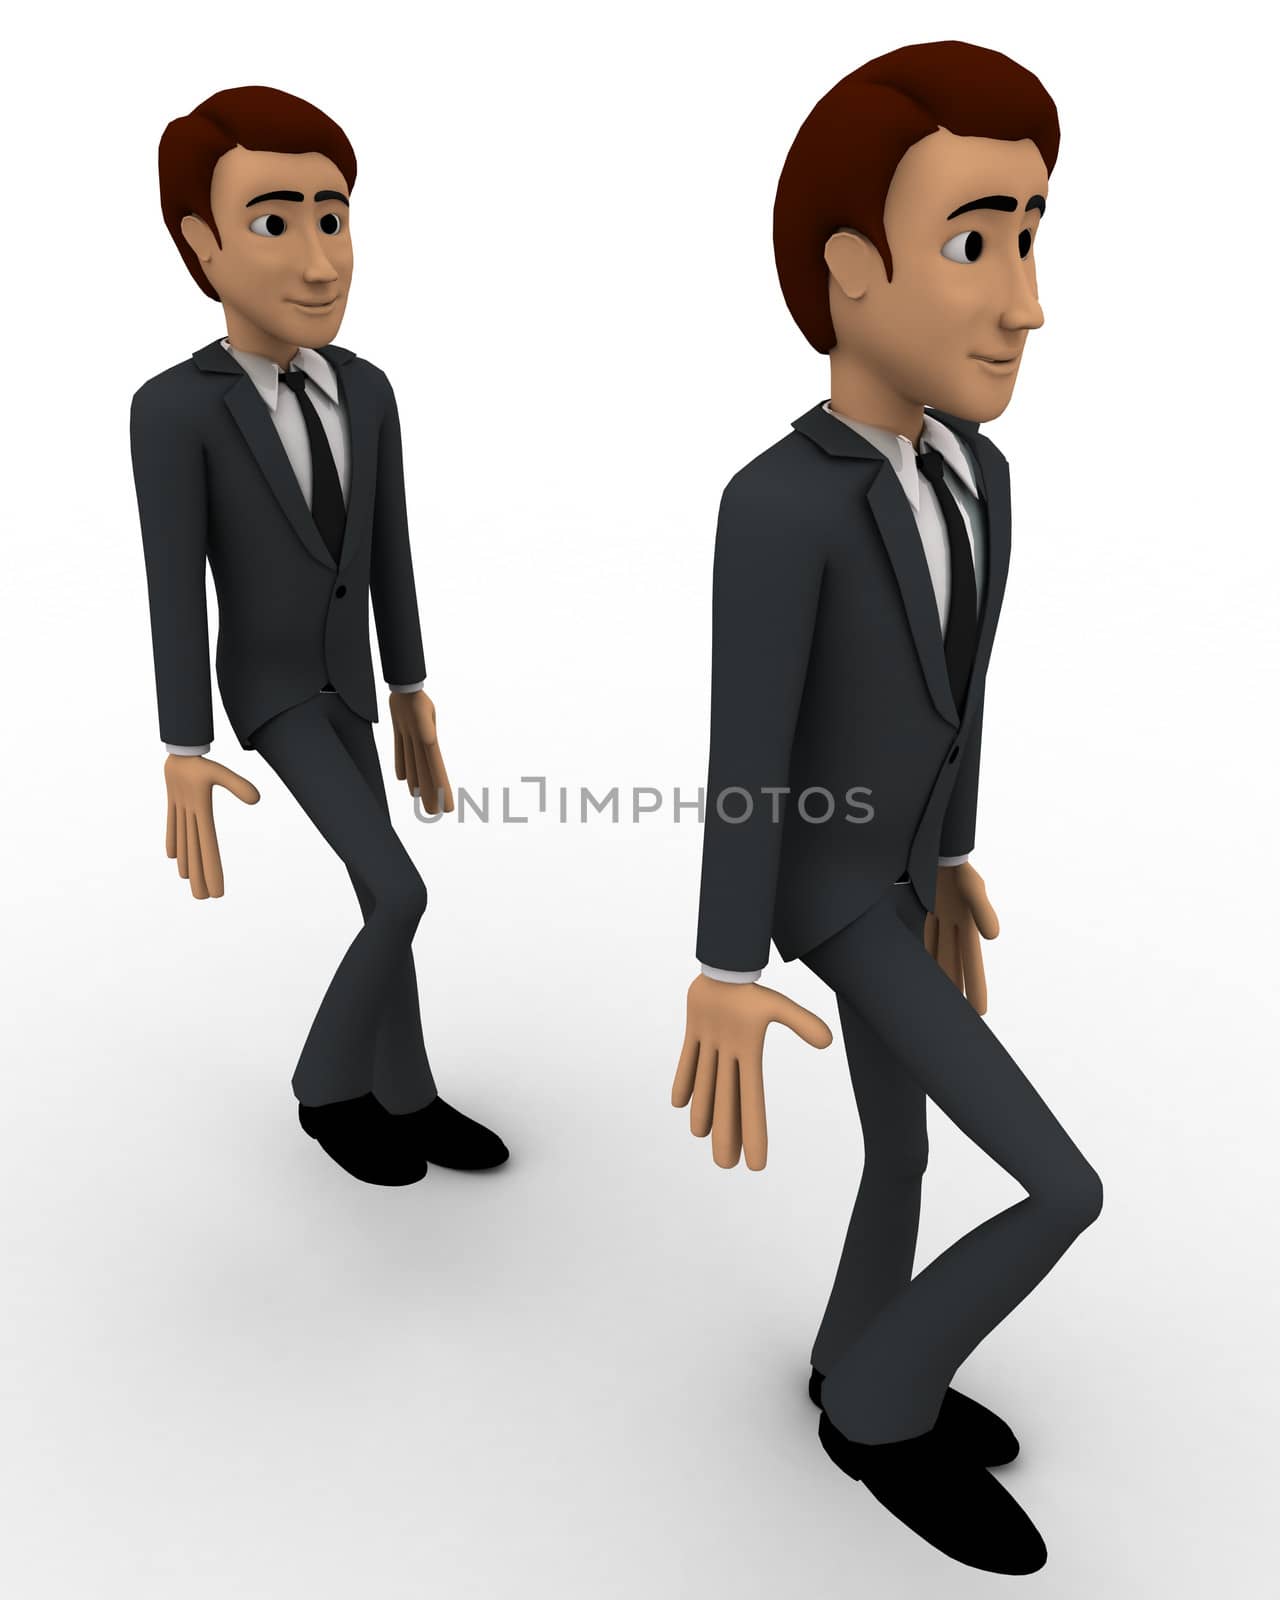 3d man following action of another man concept by touchmenithin@gmail.com